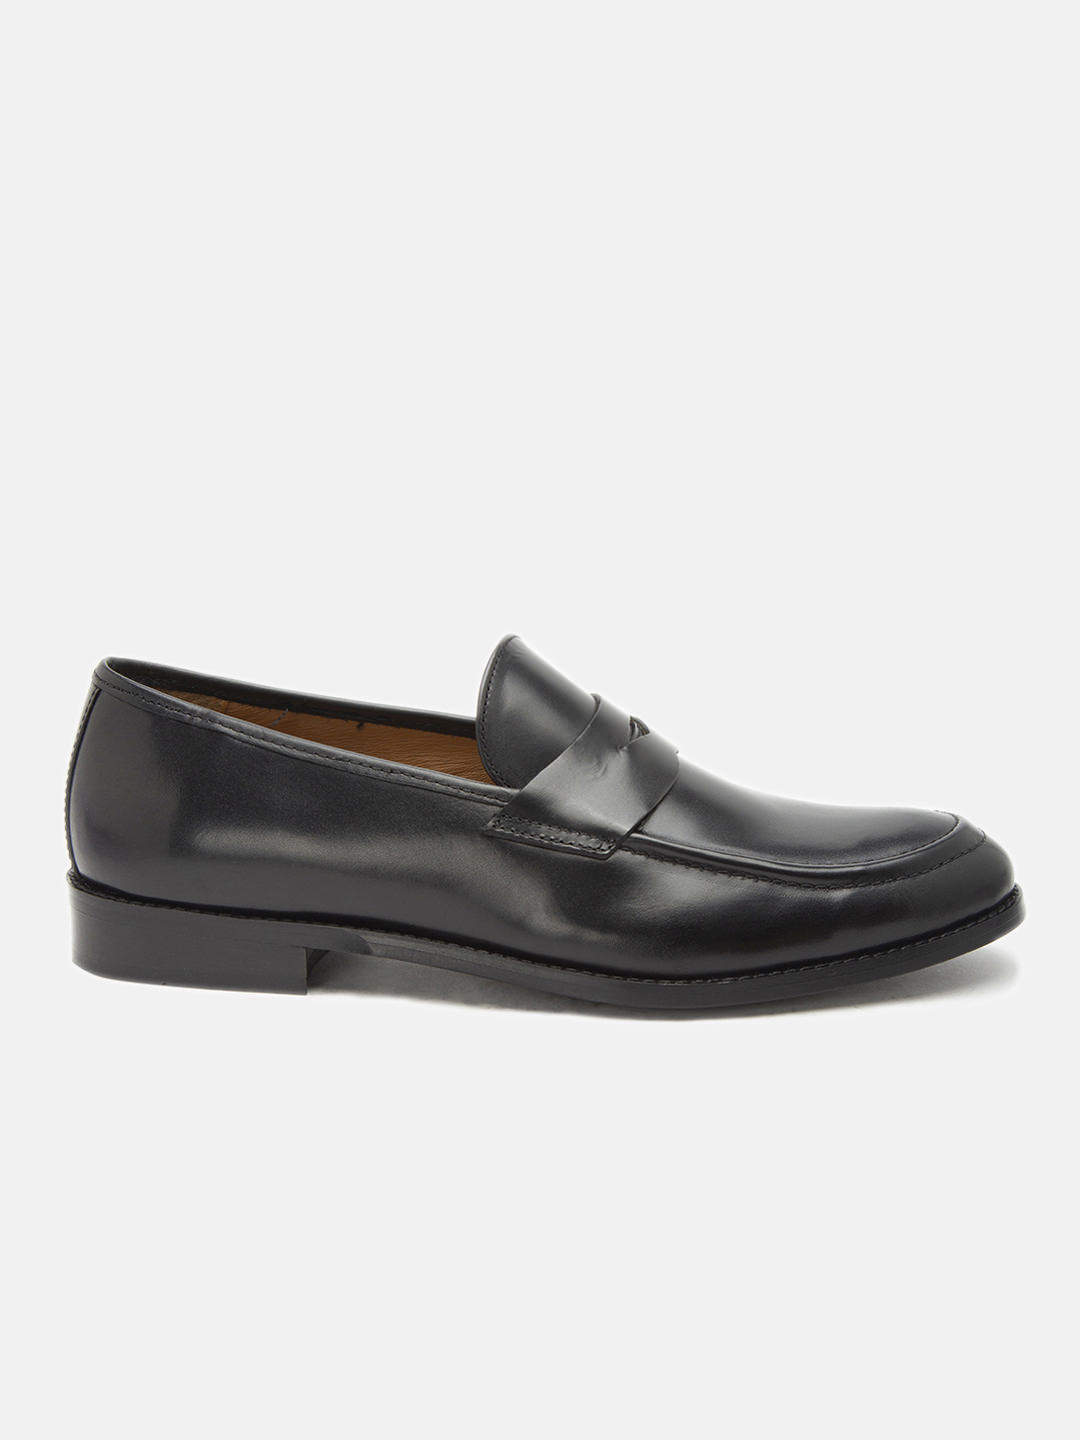 Buy Online Genuine Leather Black Penny Loafers for Men's